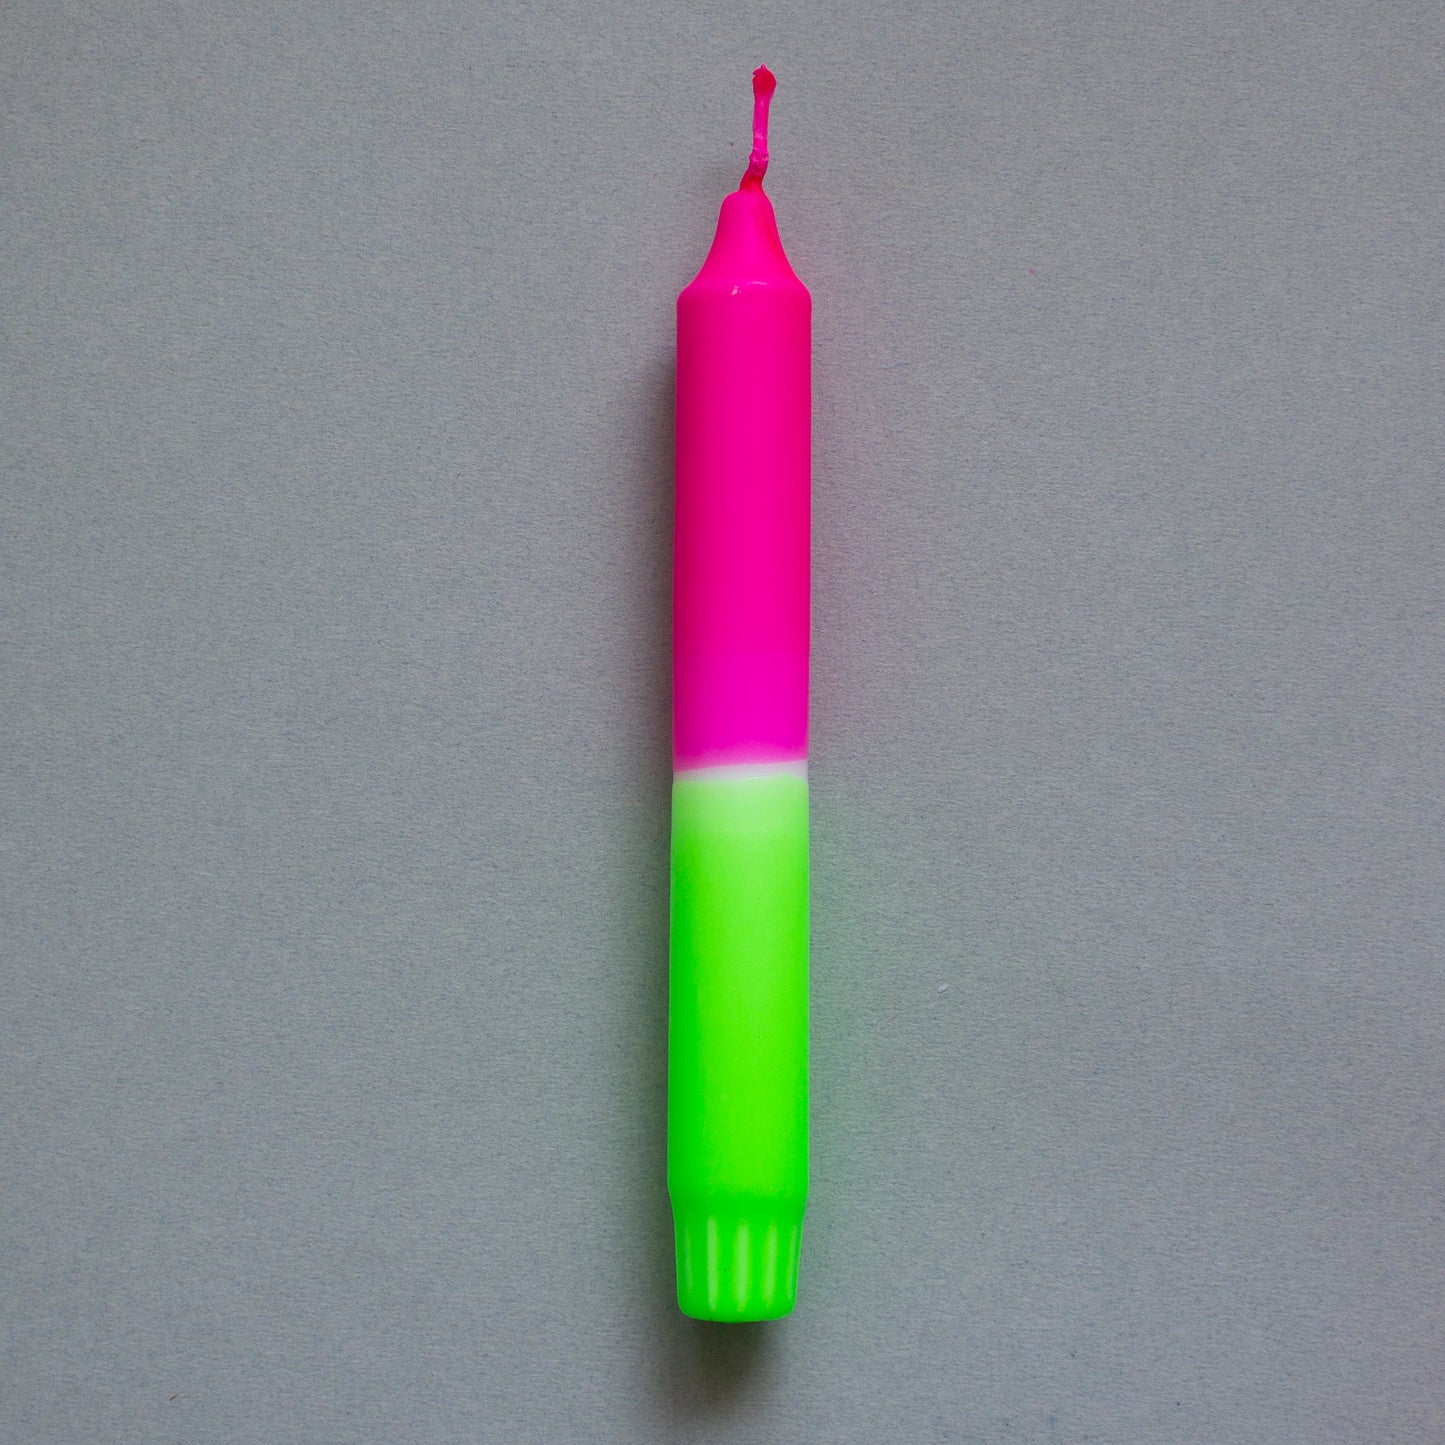 1 BICOLOR NEON CANDLE